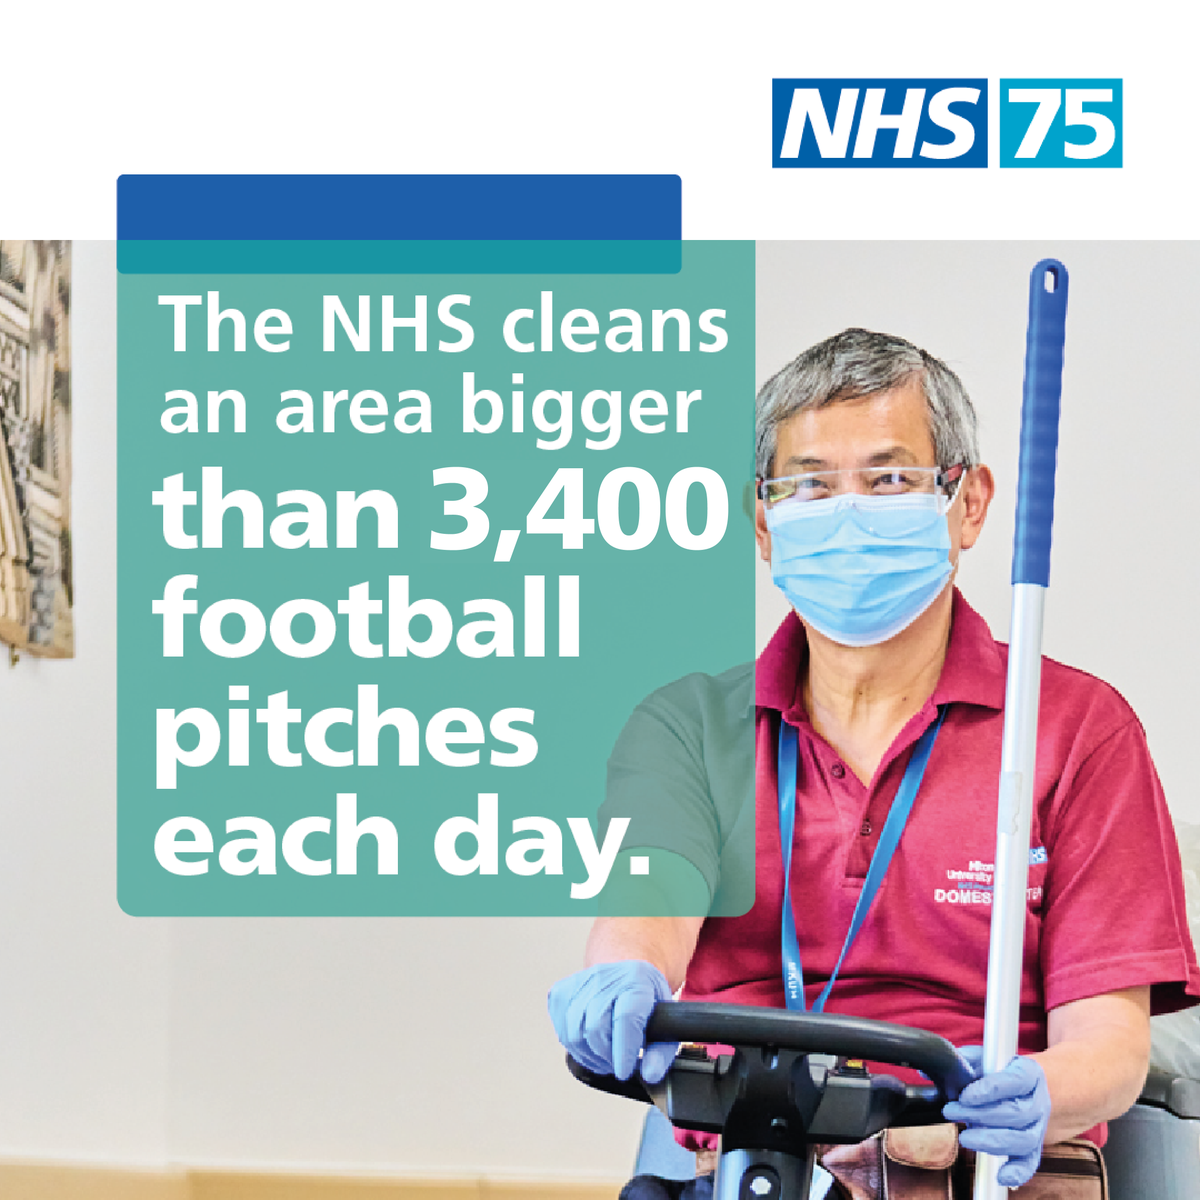 The NHS cleans an area bigger than 3,400 football pitches each day. The estates and facilities teams are vital to the NHS, without whom many other roles couldn’t function or continue to provide life-saving care. Thank you for your invaluable contribution. 💙 #NHS75